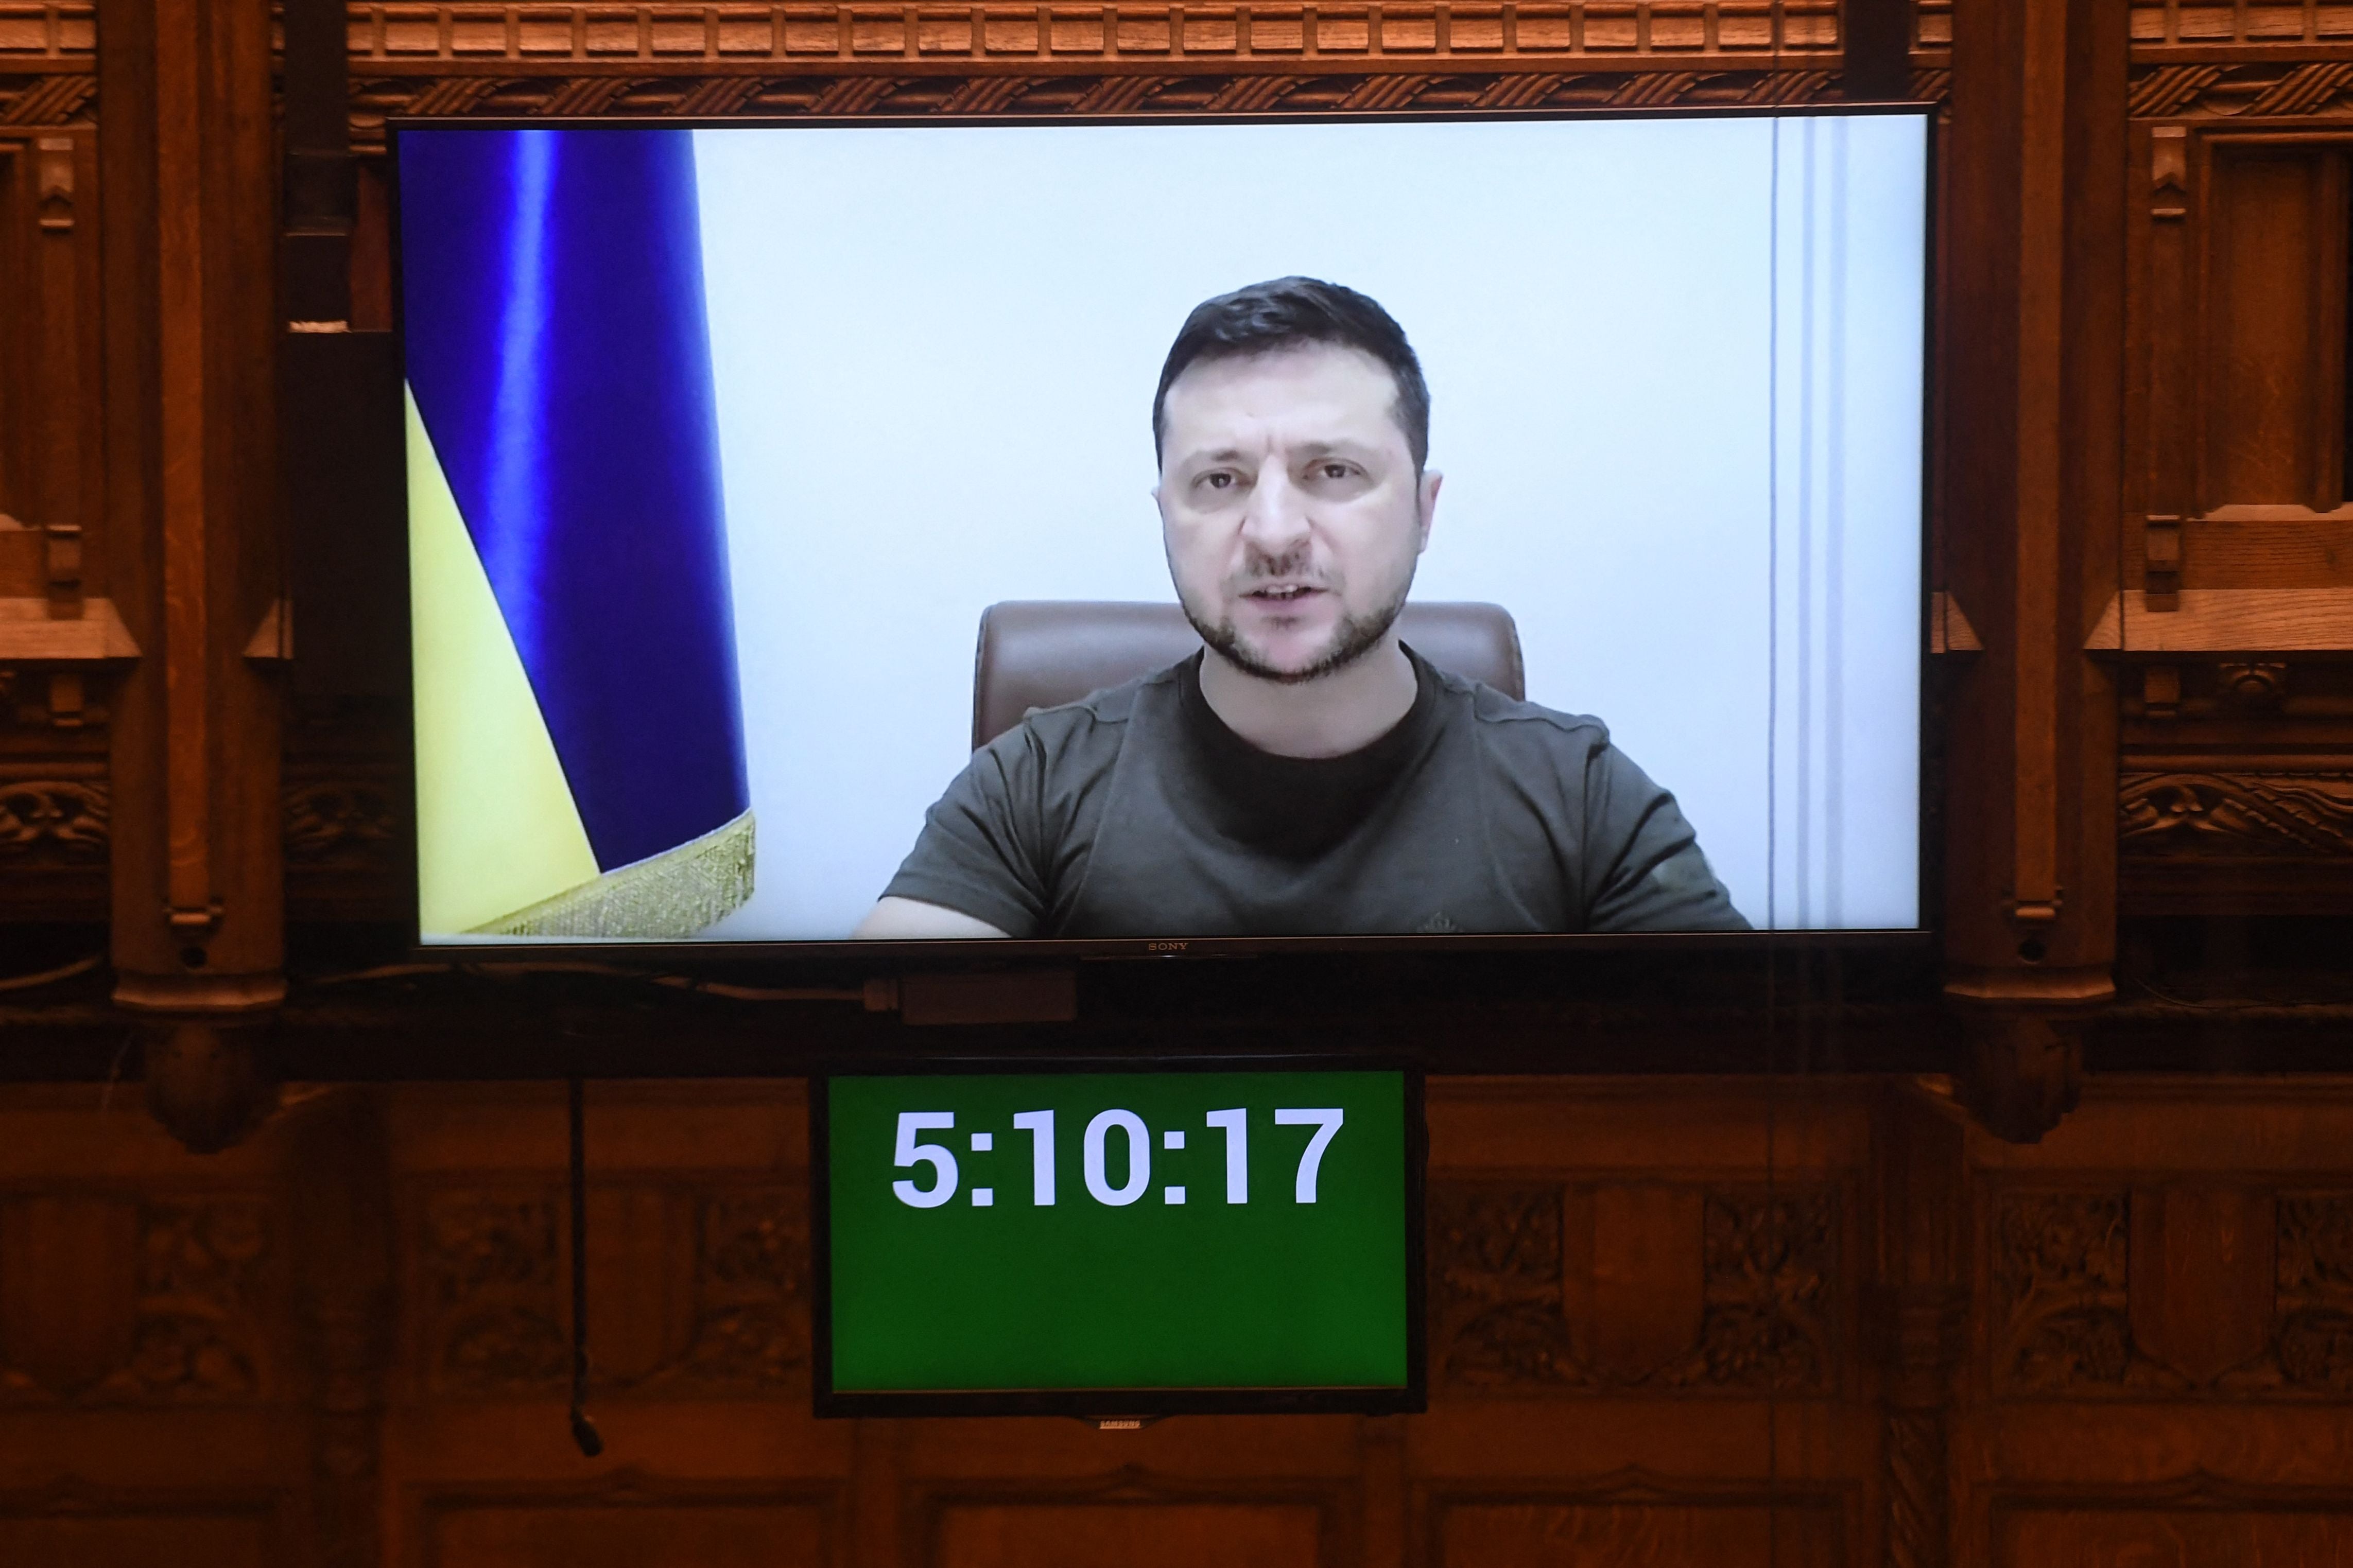 The picture was sharp and Zelensky’s voice was clear